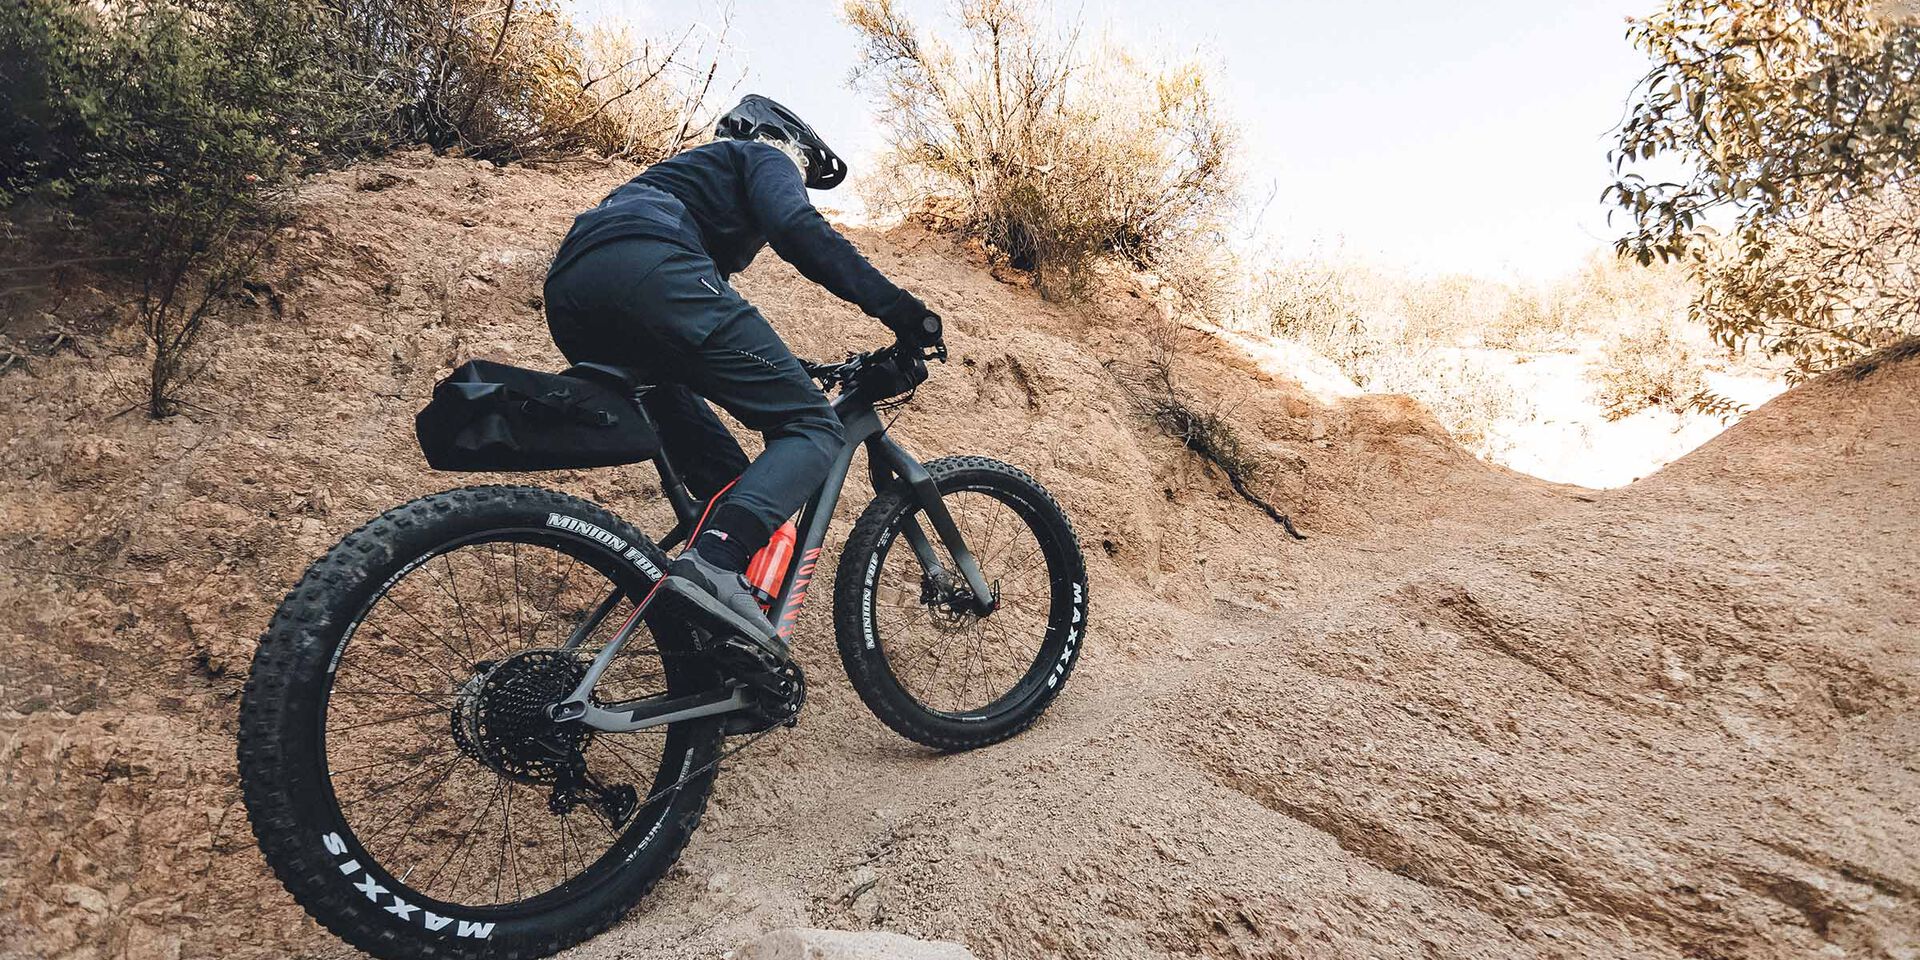 https://www.canyon.com/dw/image/v2/BCML_PRD/on/demandware.static/-/Library-Sites-canyon-shared/default/dwbcf722e6/images/plp/Mountain/Dude/canyon-fatbikes-01.jpg?sw=1920&sh=960&sm=cut